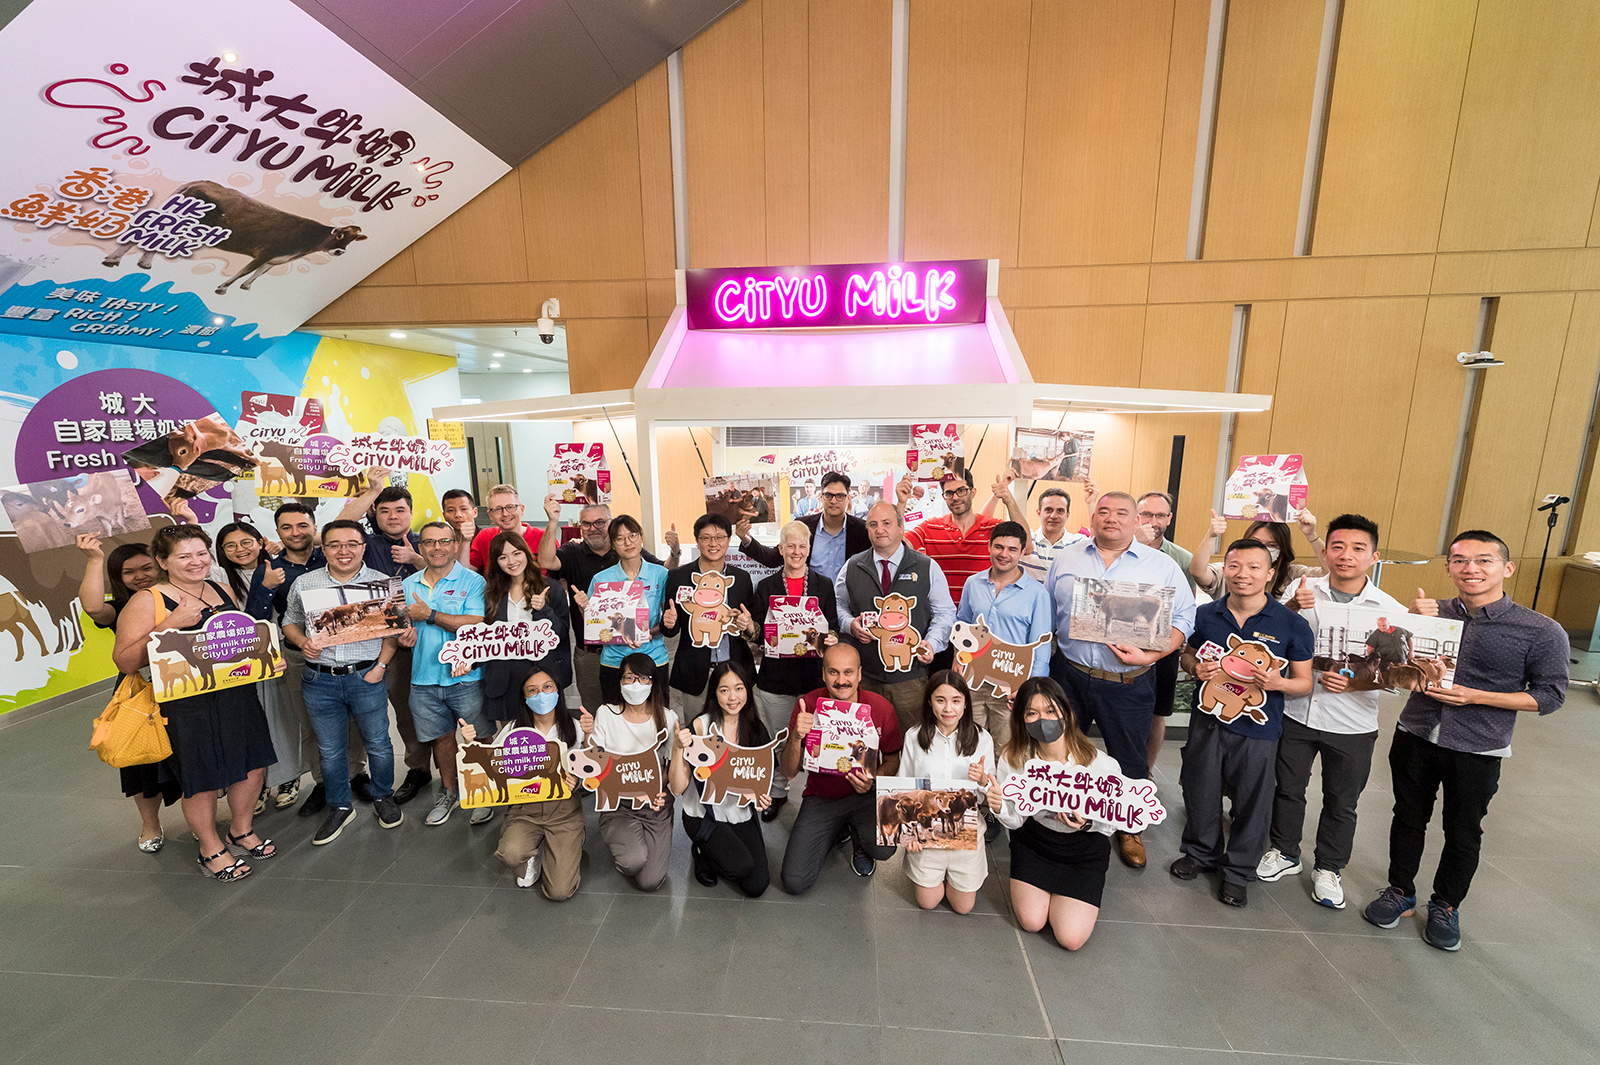 CityU staff and students celebrate the opening of the CityU Milk Product Counter.